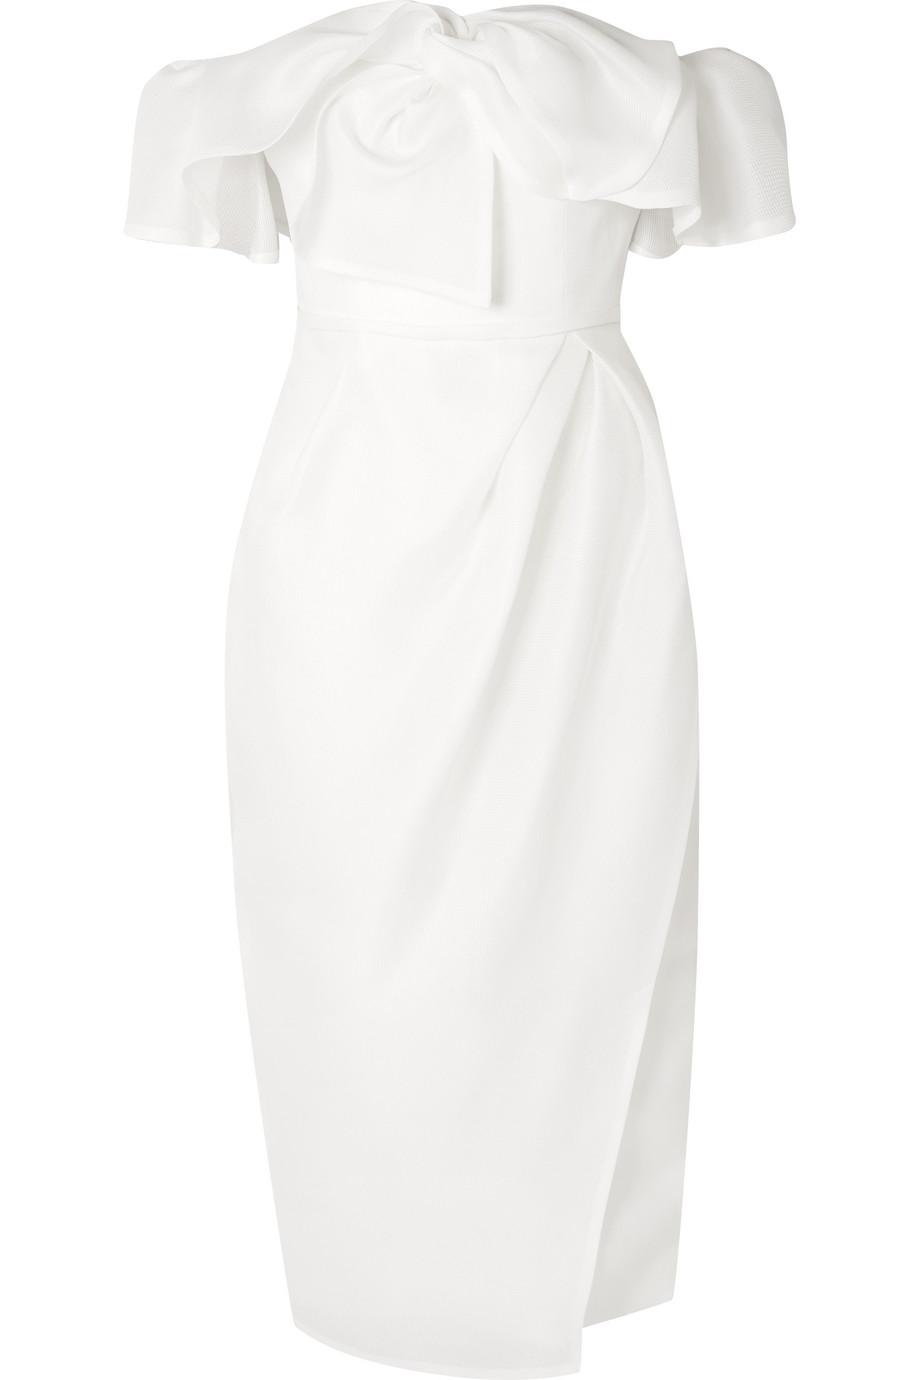 classic white cocktail dress